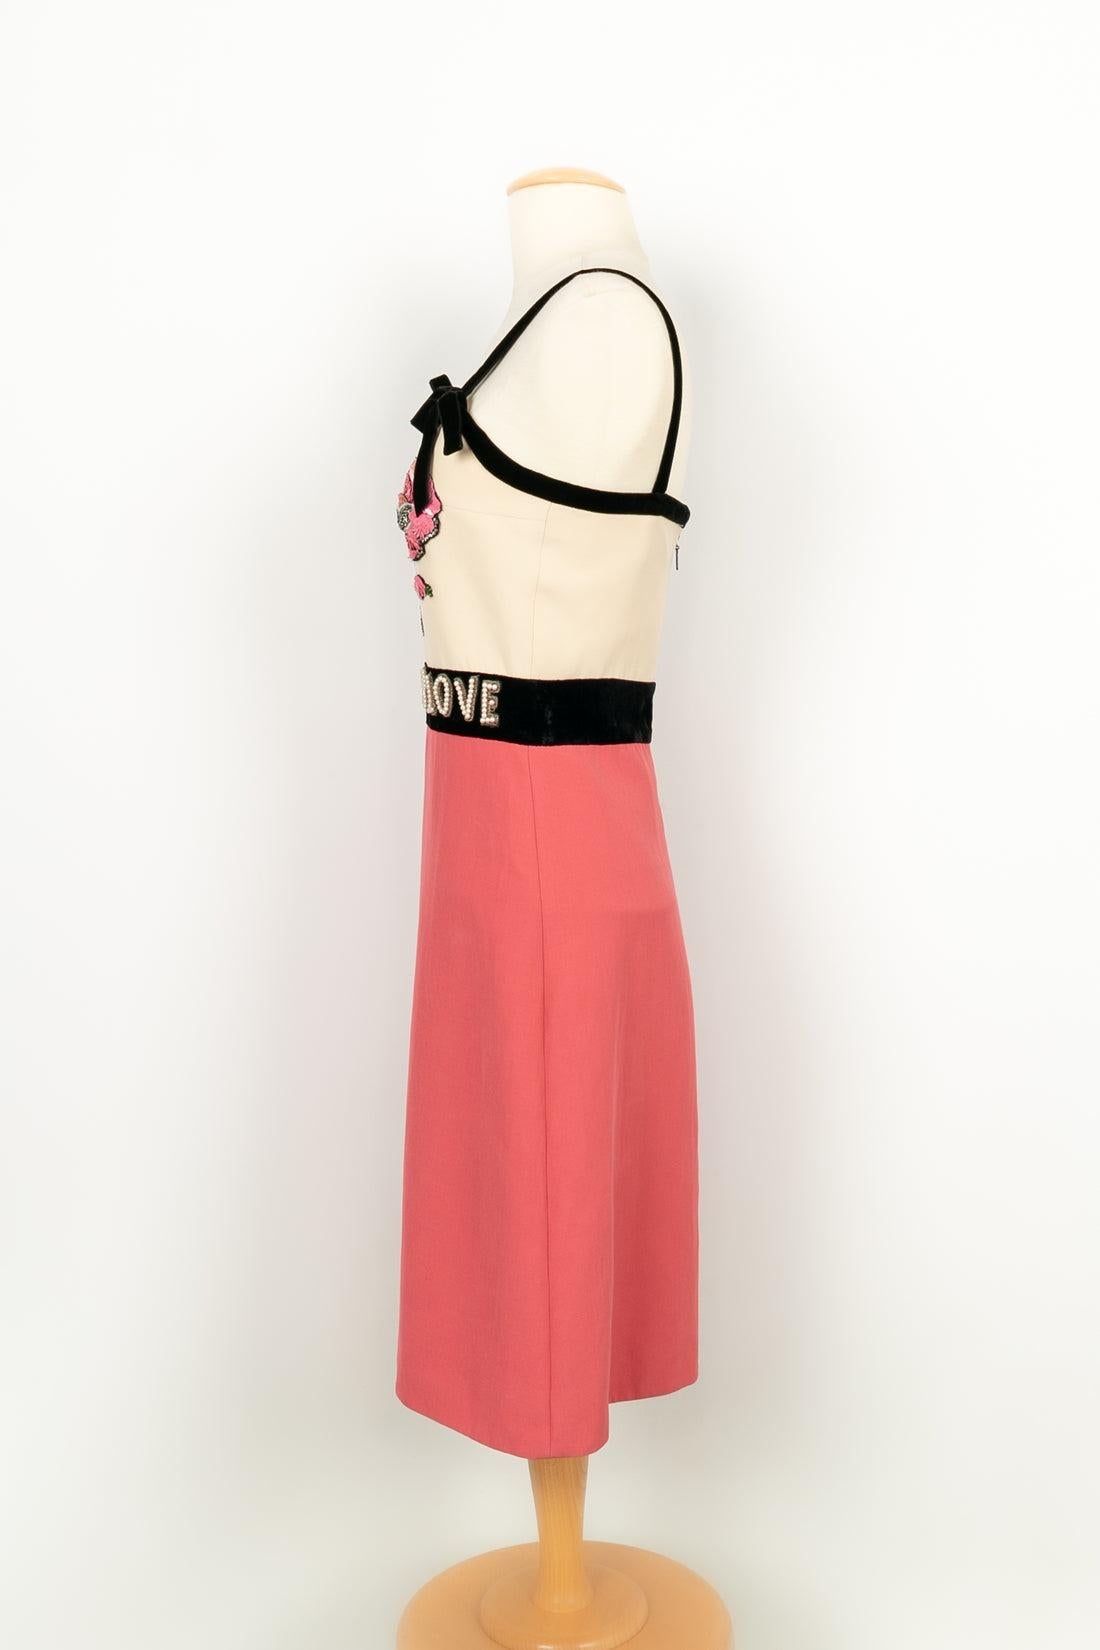 Gucci - Pink and off-white dress, embroidered with sequins and rhinestones, edged with black velvet. No size indicated, it fits a 36FR. Cruise 2017 Collection.

Additional information:
Condition: Very good condition
Dimensions: Chest: 44 cm - Waist: